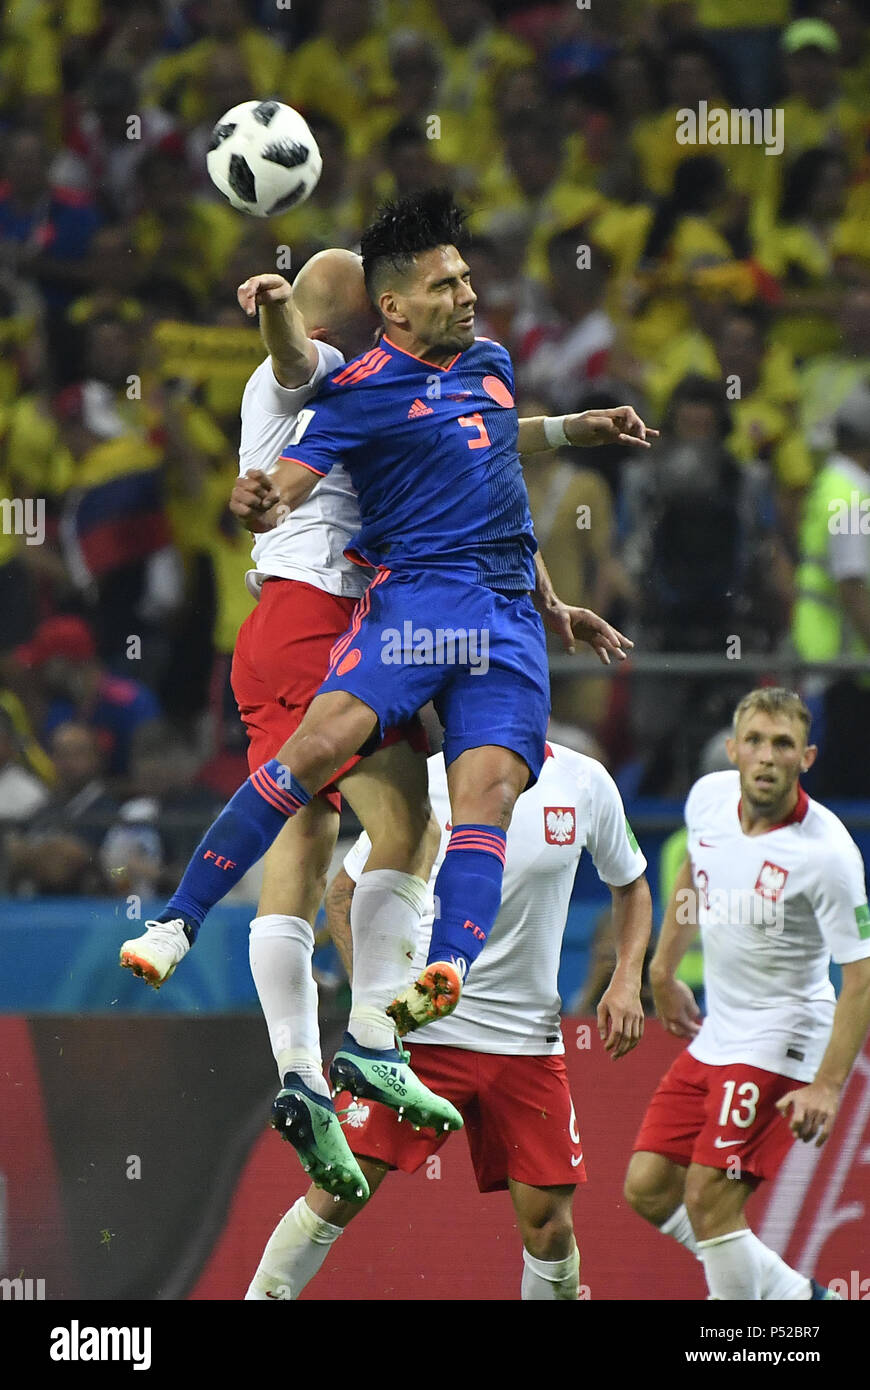 Kazan, Russia. 24th June, 2018. Radamel Falcao (R top) of Colombia competes for a header during the 2018 FIFA World Cup Group H match between Poland and Colombia in Kazan, Russia, June 24, 2018. Credit: He Canling/Xinhua/Alamy Live News Stock Photo